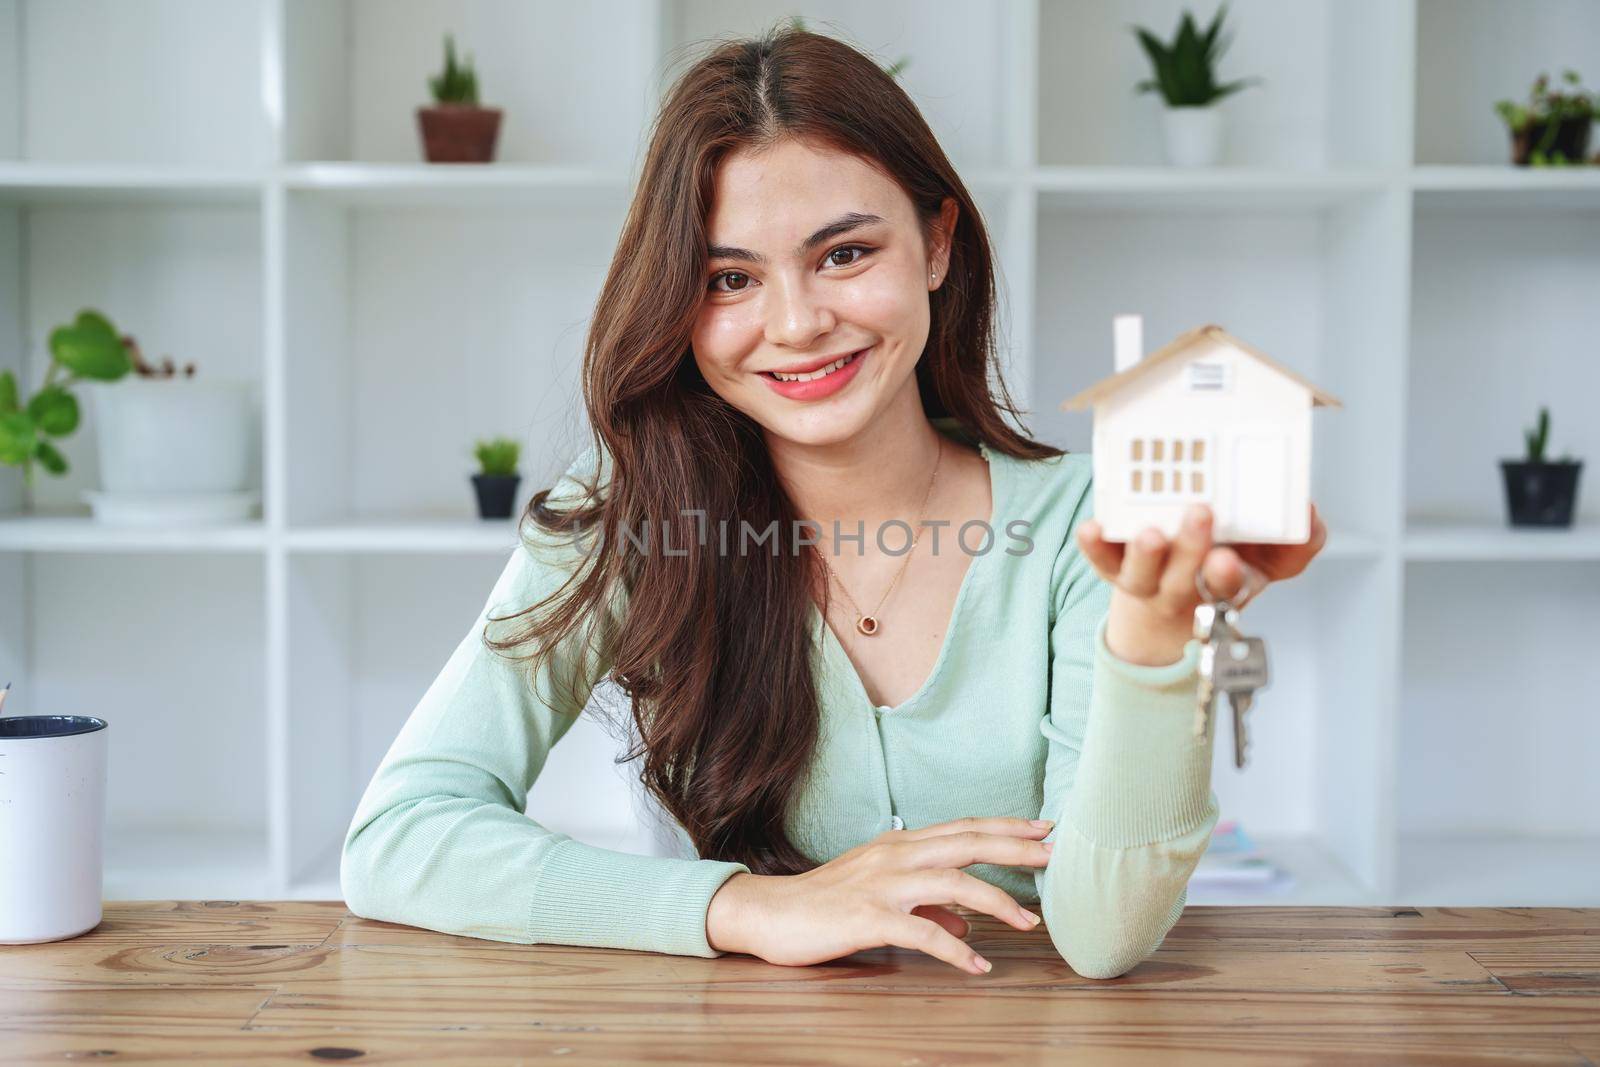 The customer holds the house model and keys after agreeing to invest in the housing purchase.